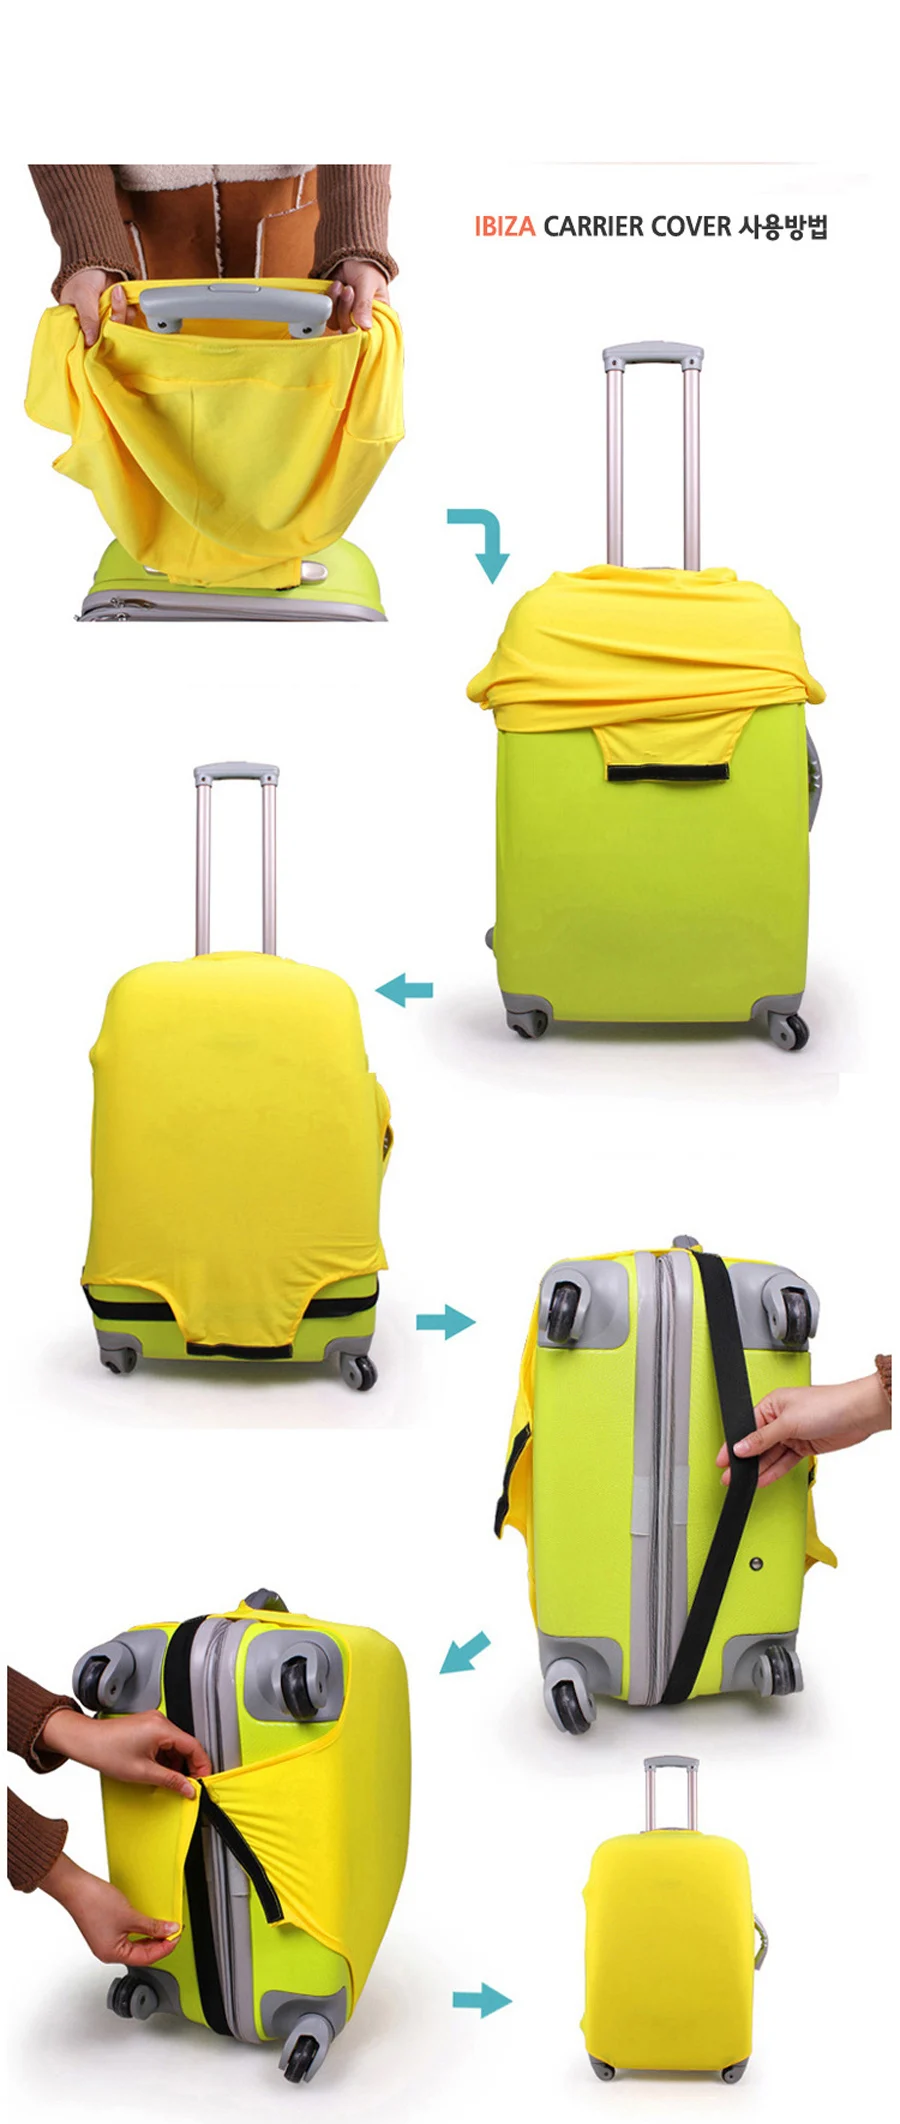 Hot Travel Luggage Cover Trolley Protective Case Suitcase Dust Cover for 18" - 30"Luggage Baggage Bag covers Travel Accessories